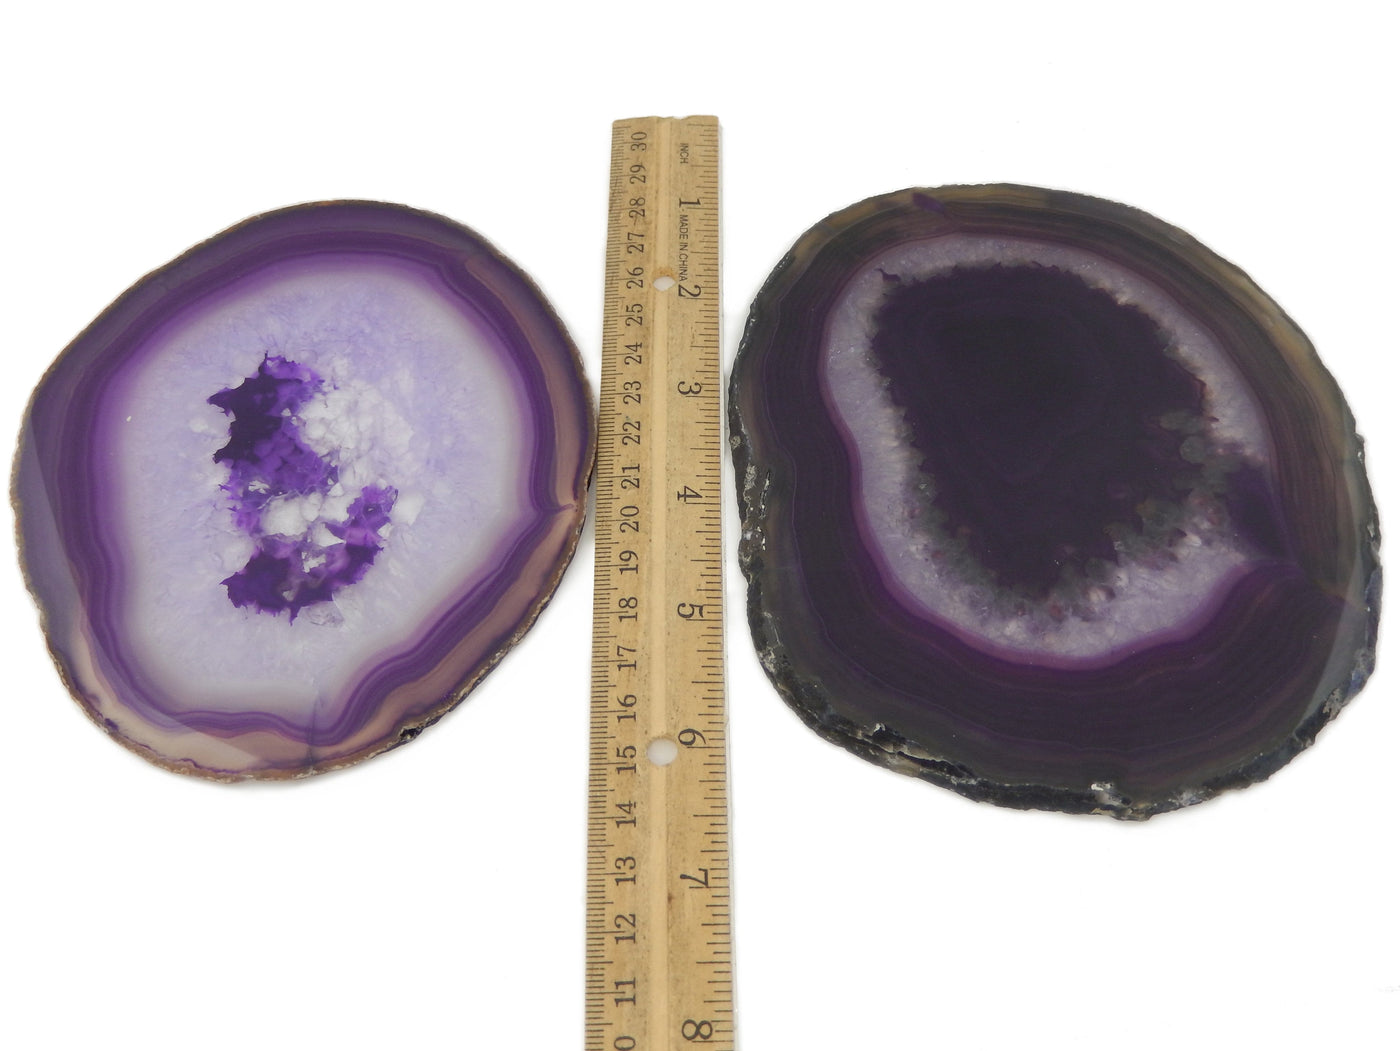 2 purple agate slices next to a ruler